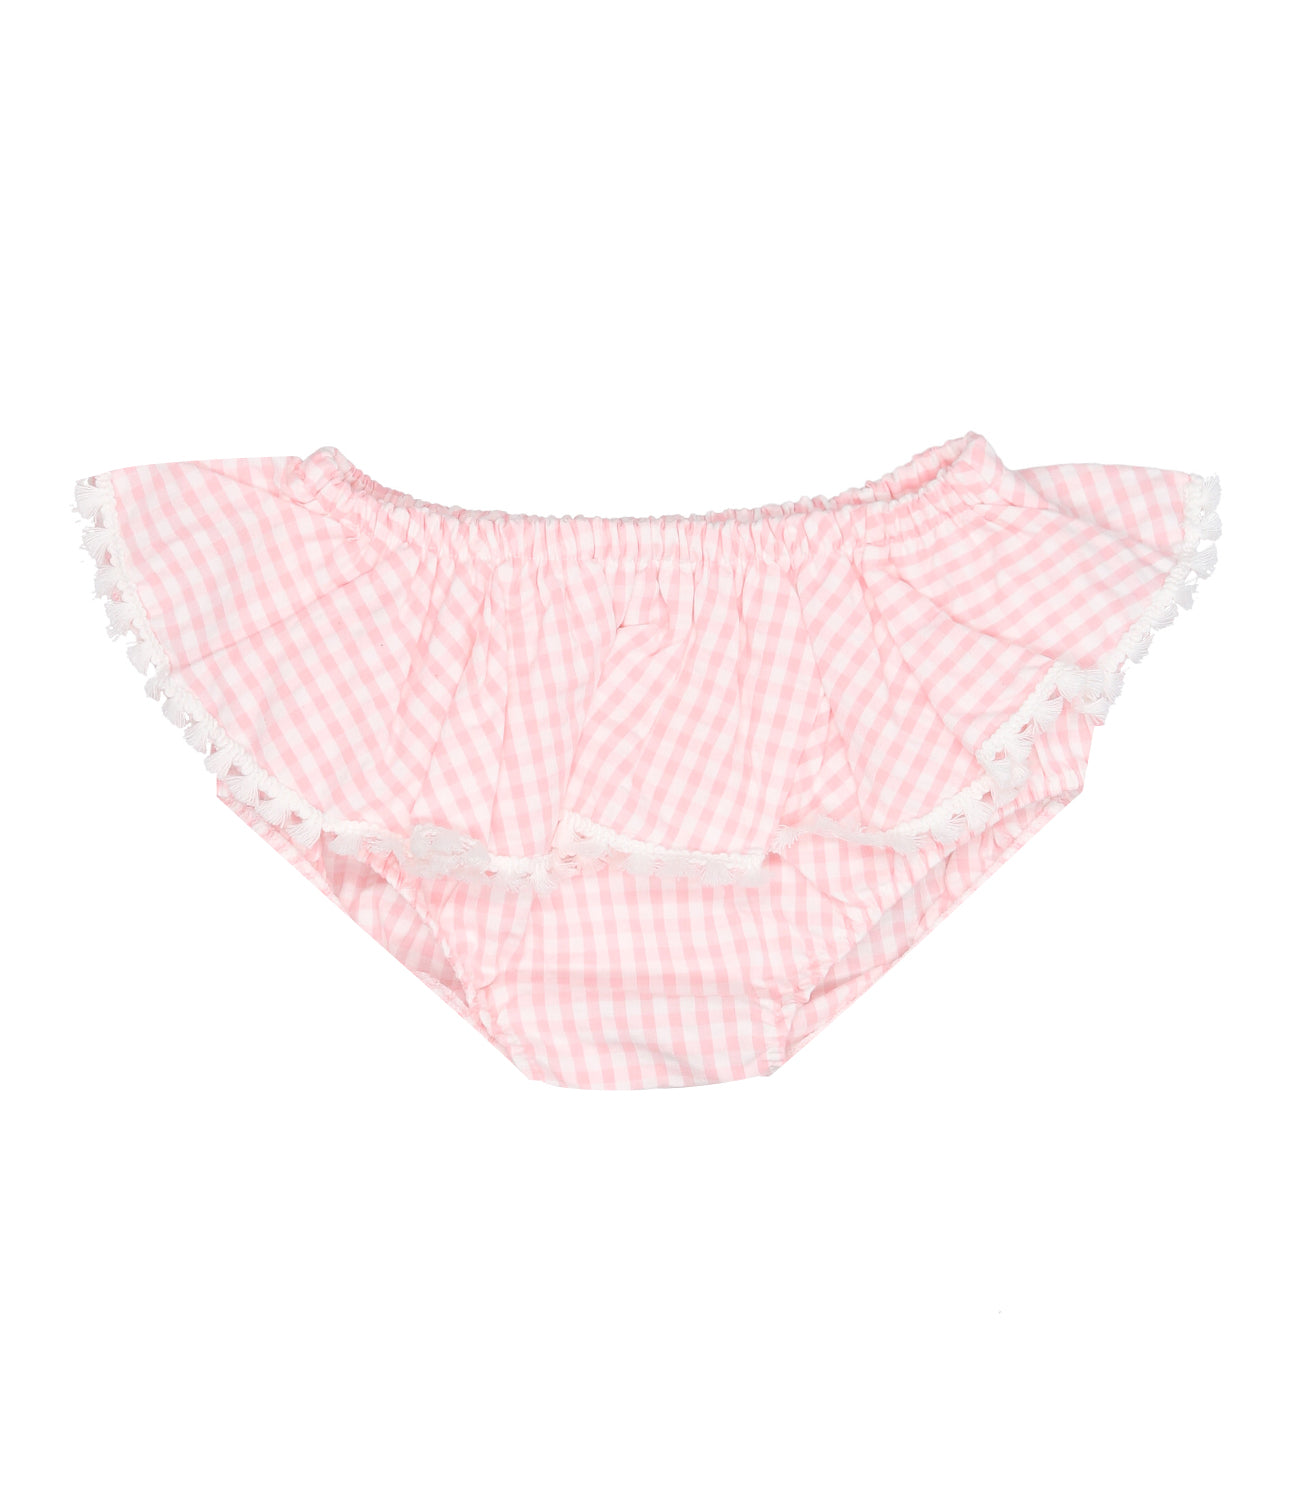 MC2 Saint Barth | Pink and White Swimsuit Briefs